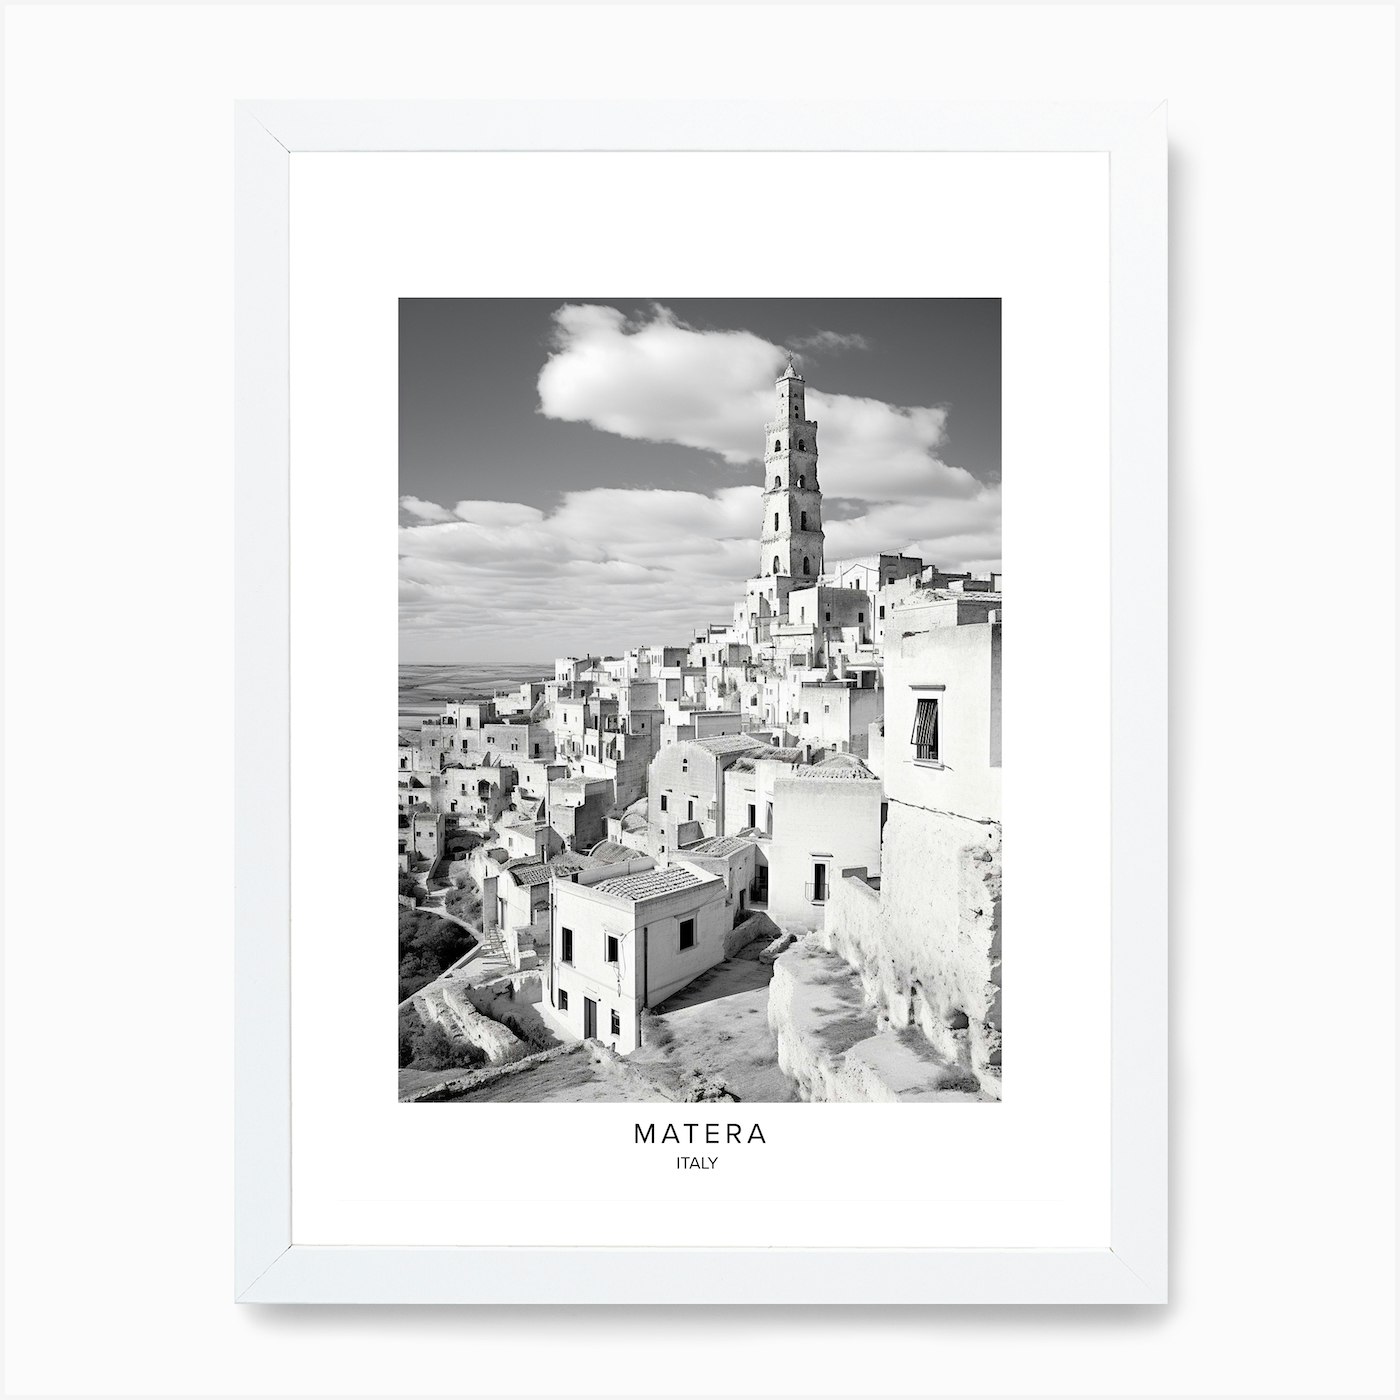 Poster Of Matera, Italy, Black And White Analogue Photography 4 Art Print  by Monochrome Vistas - Fy